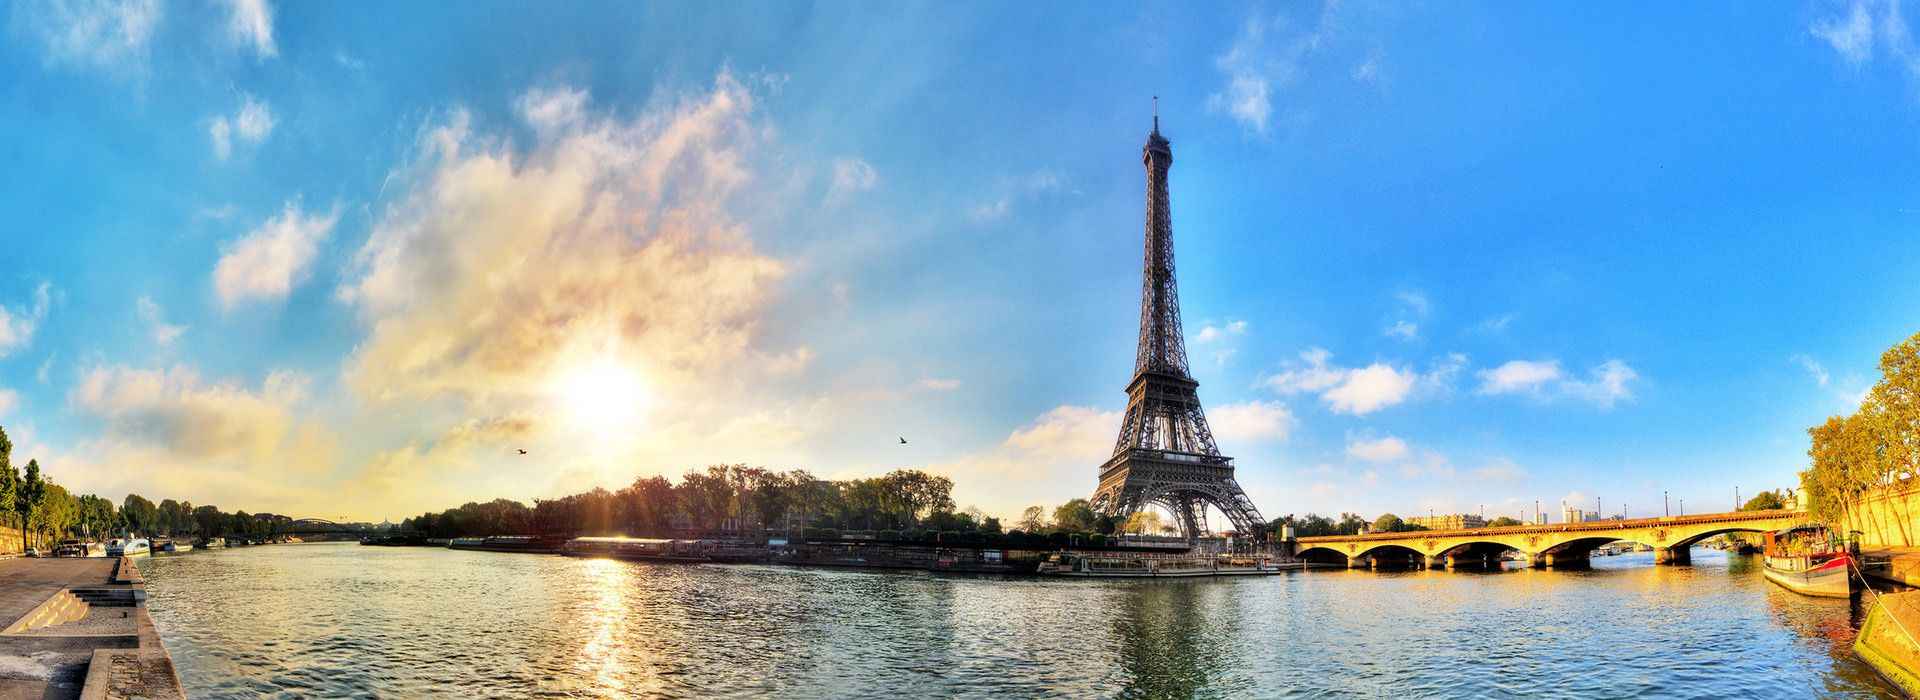 France Travel Guide - Travel Insights and Tips